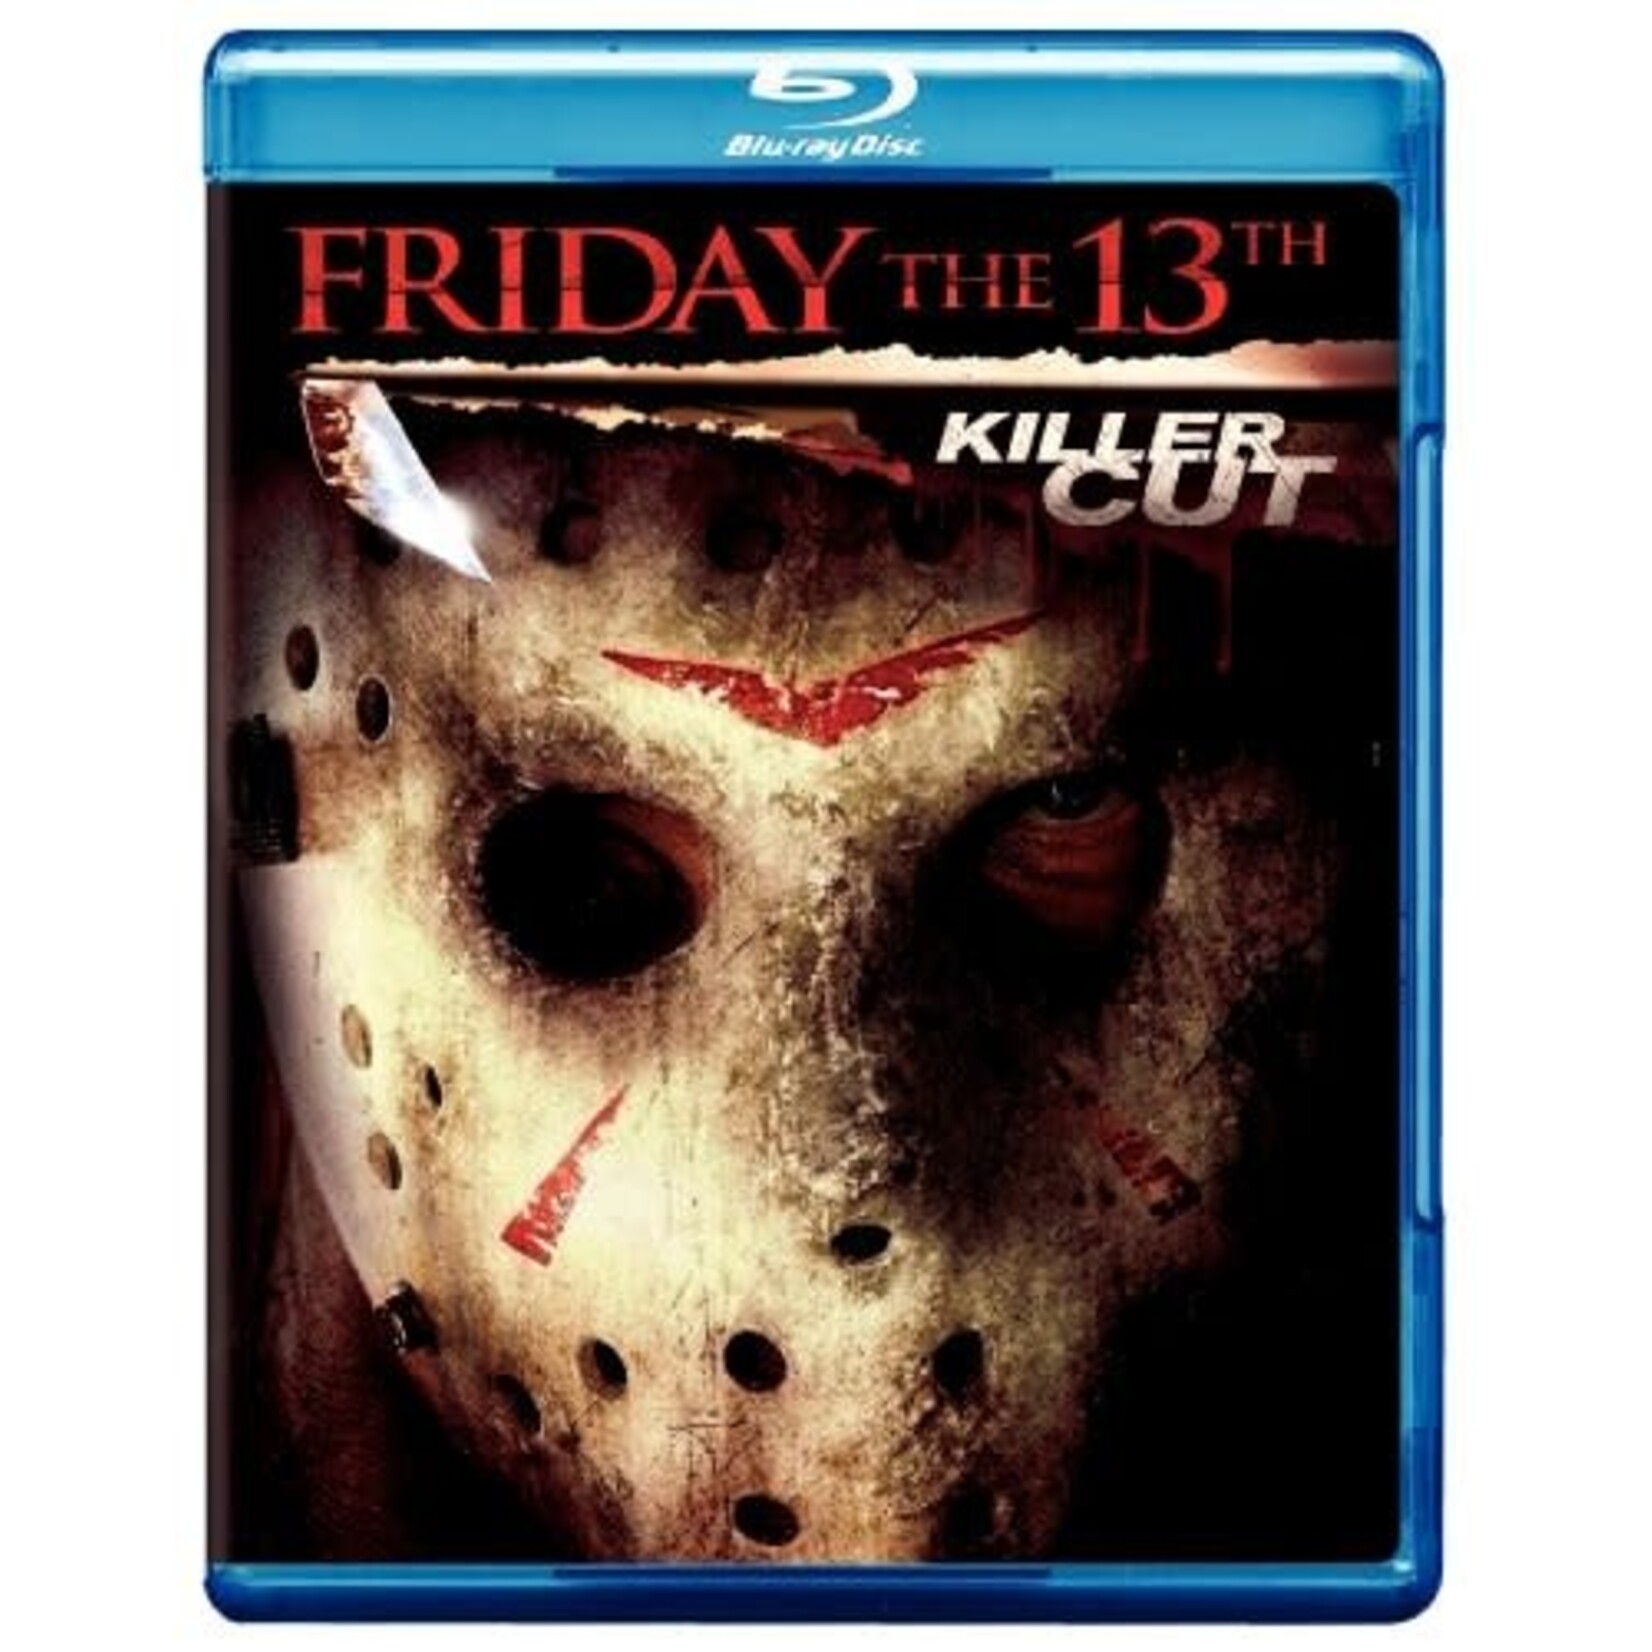 Friday The 13th (2009) [USED BRD]